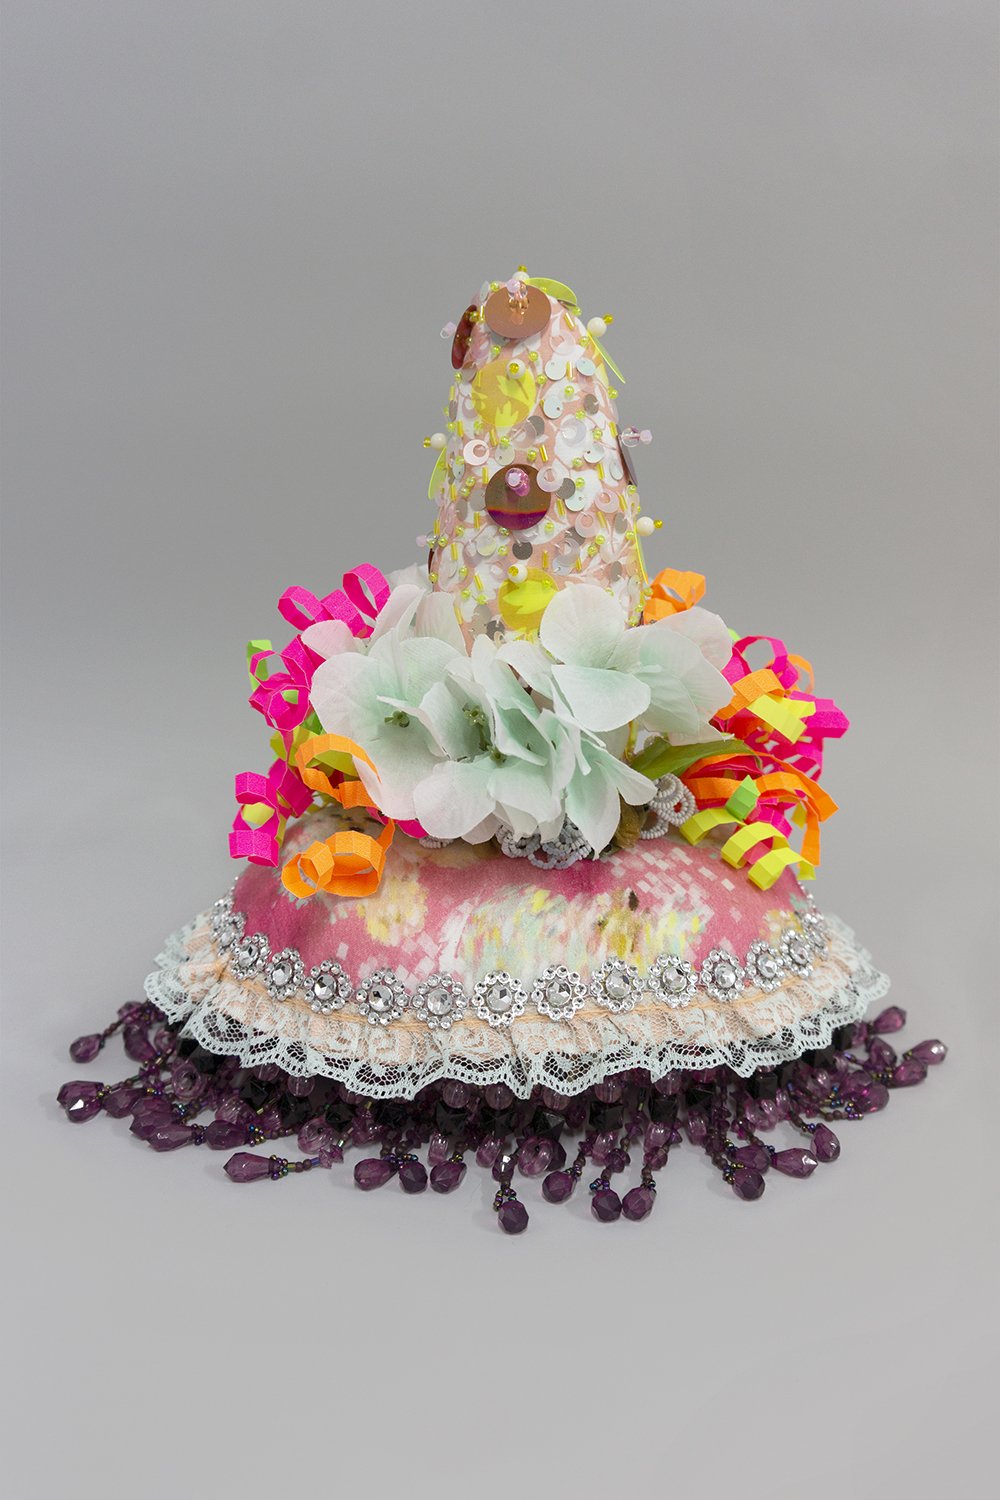   Untitled,  2022, Crystal and plastic beads and sequins, found fabric, trim, fabric flowers, ribbon, beaded flowers, polyester batting, thread, 10 x 11 x 9” 